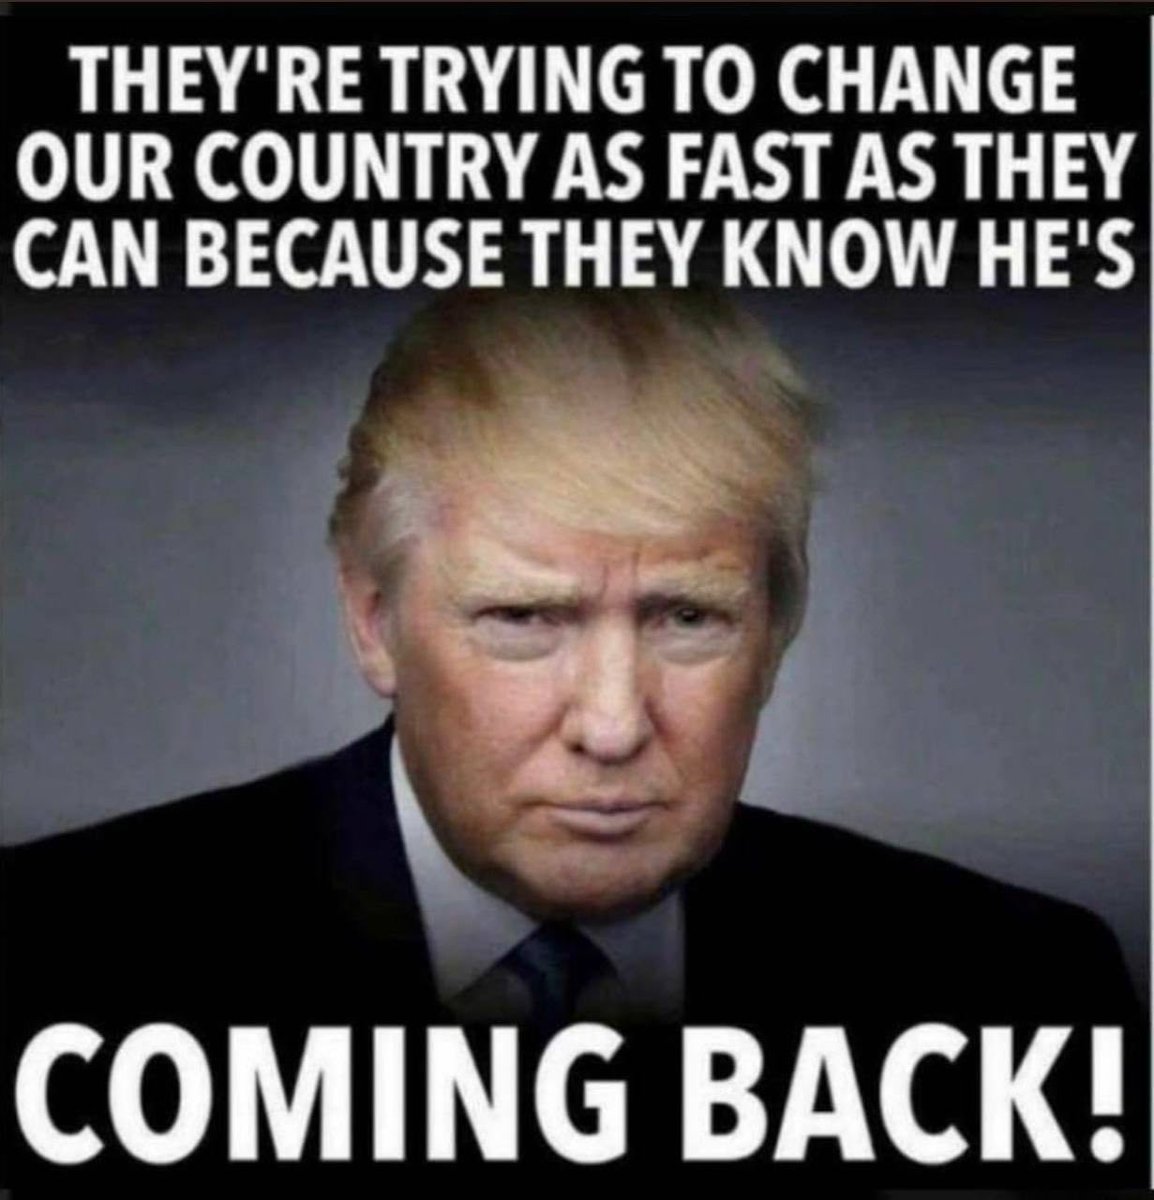 @Pgh_Buz @bdonesem @8_27J @PaulMer53 @Big4USA @Bree1914 @cali_beachangel @Catahoulas_rule @Chicago1Ray @DMcDMuffin @PAYthe_PIPER @f_a_r_a_h_9 @goin_nice @goldisez @JDugudichi @mil_vet17 @mollie_don @rreeves5 @TJLakers01 @x4Eileen @Bagel69er 💥WOW Pittsburgh💥, you assembled yet another Great List of Patriots! TY for seat, glad to be with them &Led by a Great Conductor!
💥🇺🇸 𝙐𝙣𝙞𝙩𝙞𝙣𝙜 𝙋𝙖𝙩𝙧𝙞𝙤𝙩𝙨 💯
💥👉 𝙋𝙡𝙚𝙖𝙨𝙚 𝙁𝙤𝙡𝙡𝙤𝙬 
@Pgh_Buz 👈💯🇺🇸💥

💥👉 𝙋𝙡𝙚𝙖𝙨𝙚 𝙁𝙤𝙡𝙡𝙤𝙬 
@Ultra_USMAga_FL 👈💯💥